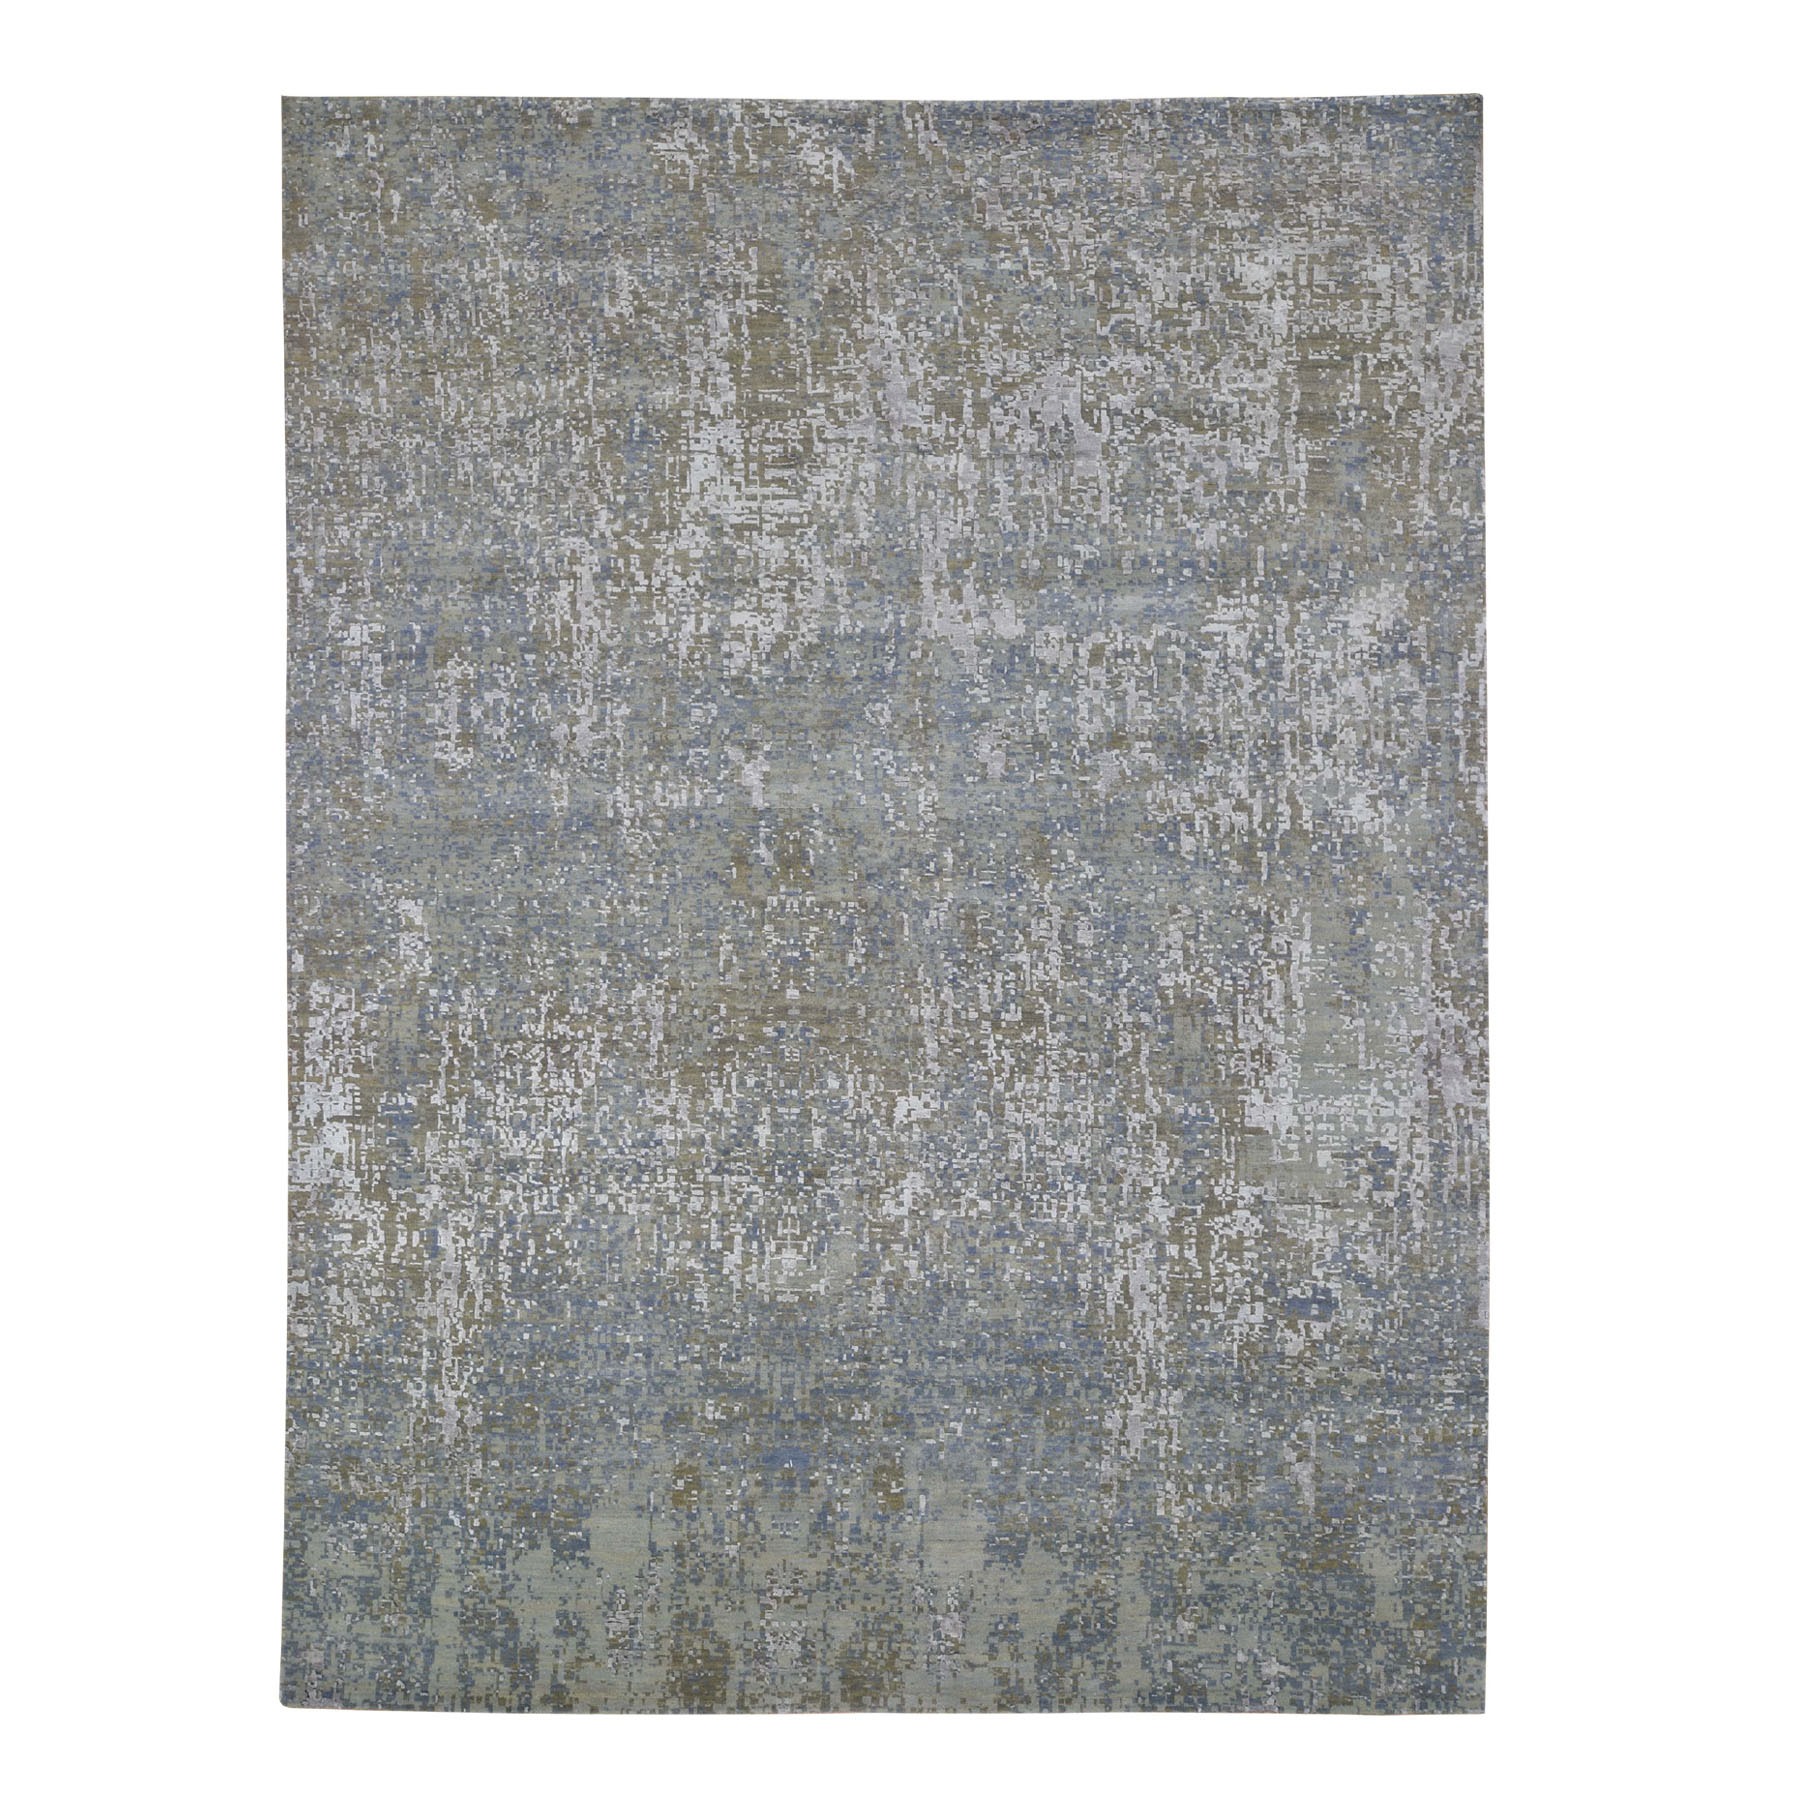 9'x12'2" Gray Abstract Design Wool And Pure Silk Hand Woven Oriental Rug 